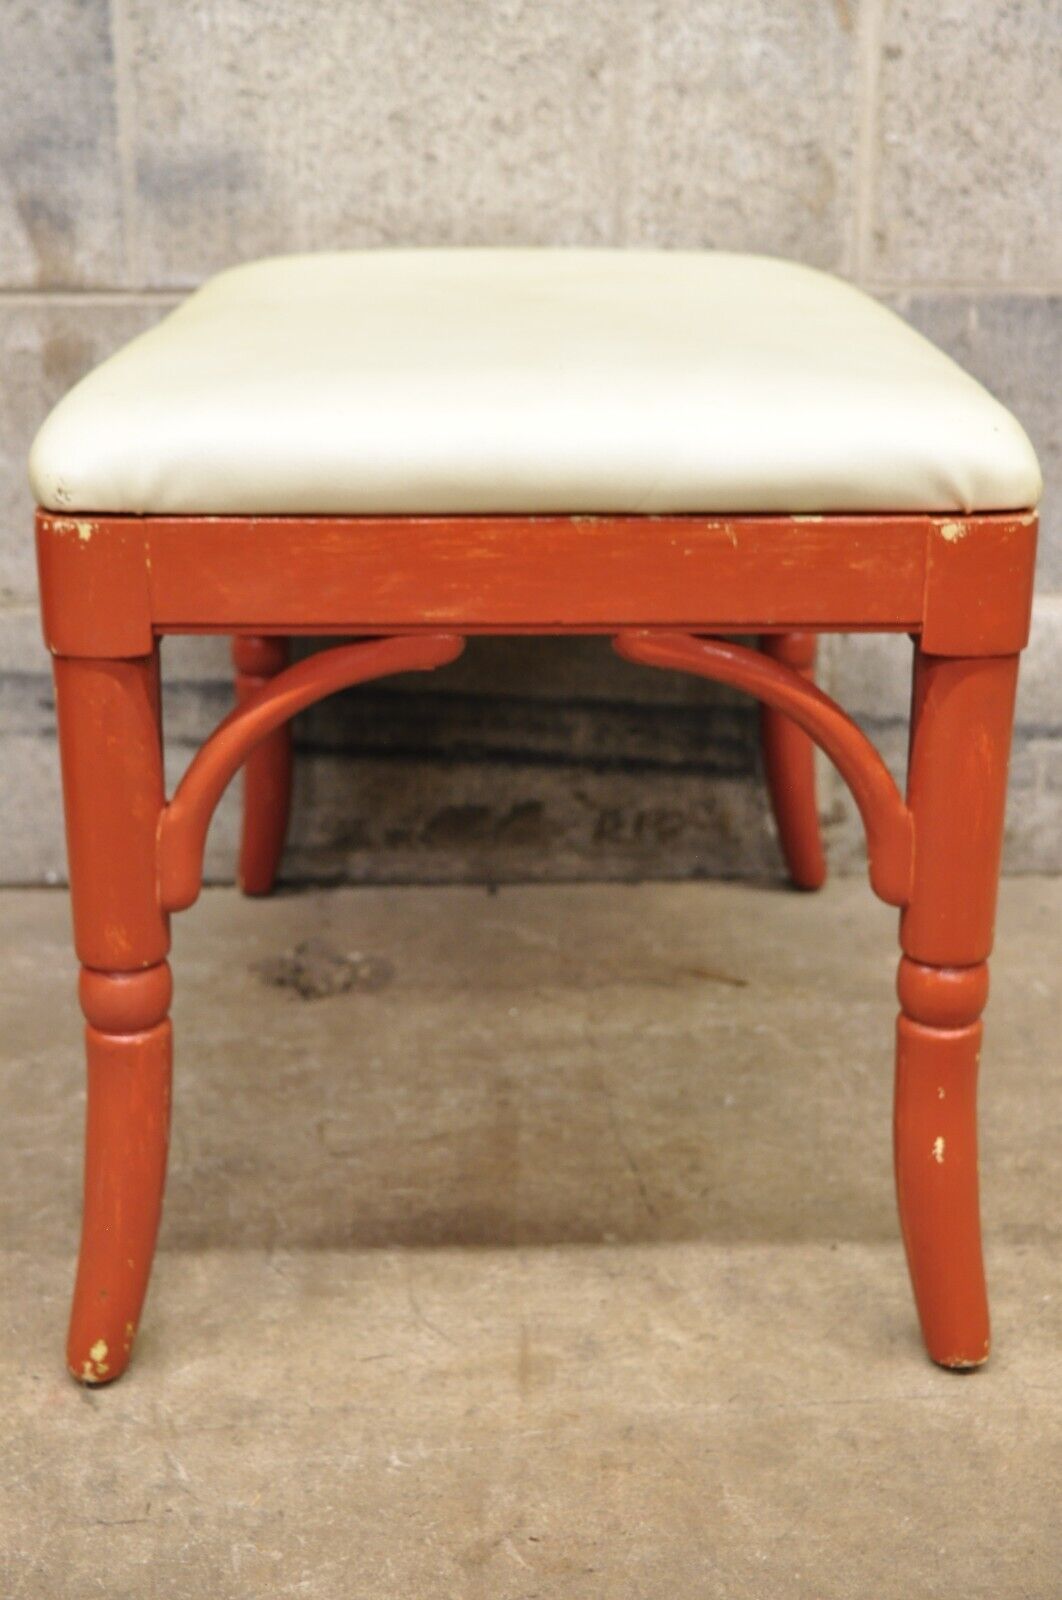 Thomasville Allegro Faux Bamboo Hollywood Wood Coral Painted Vanity Bench